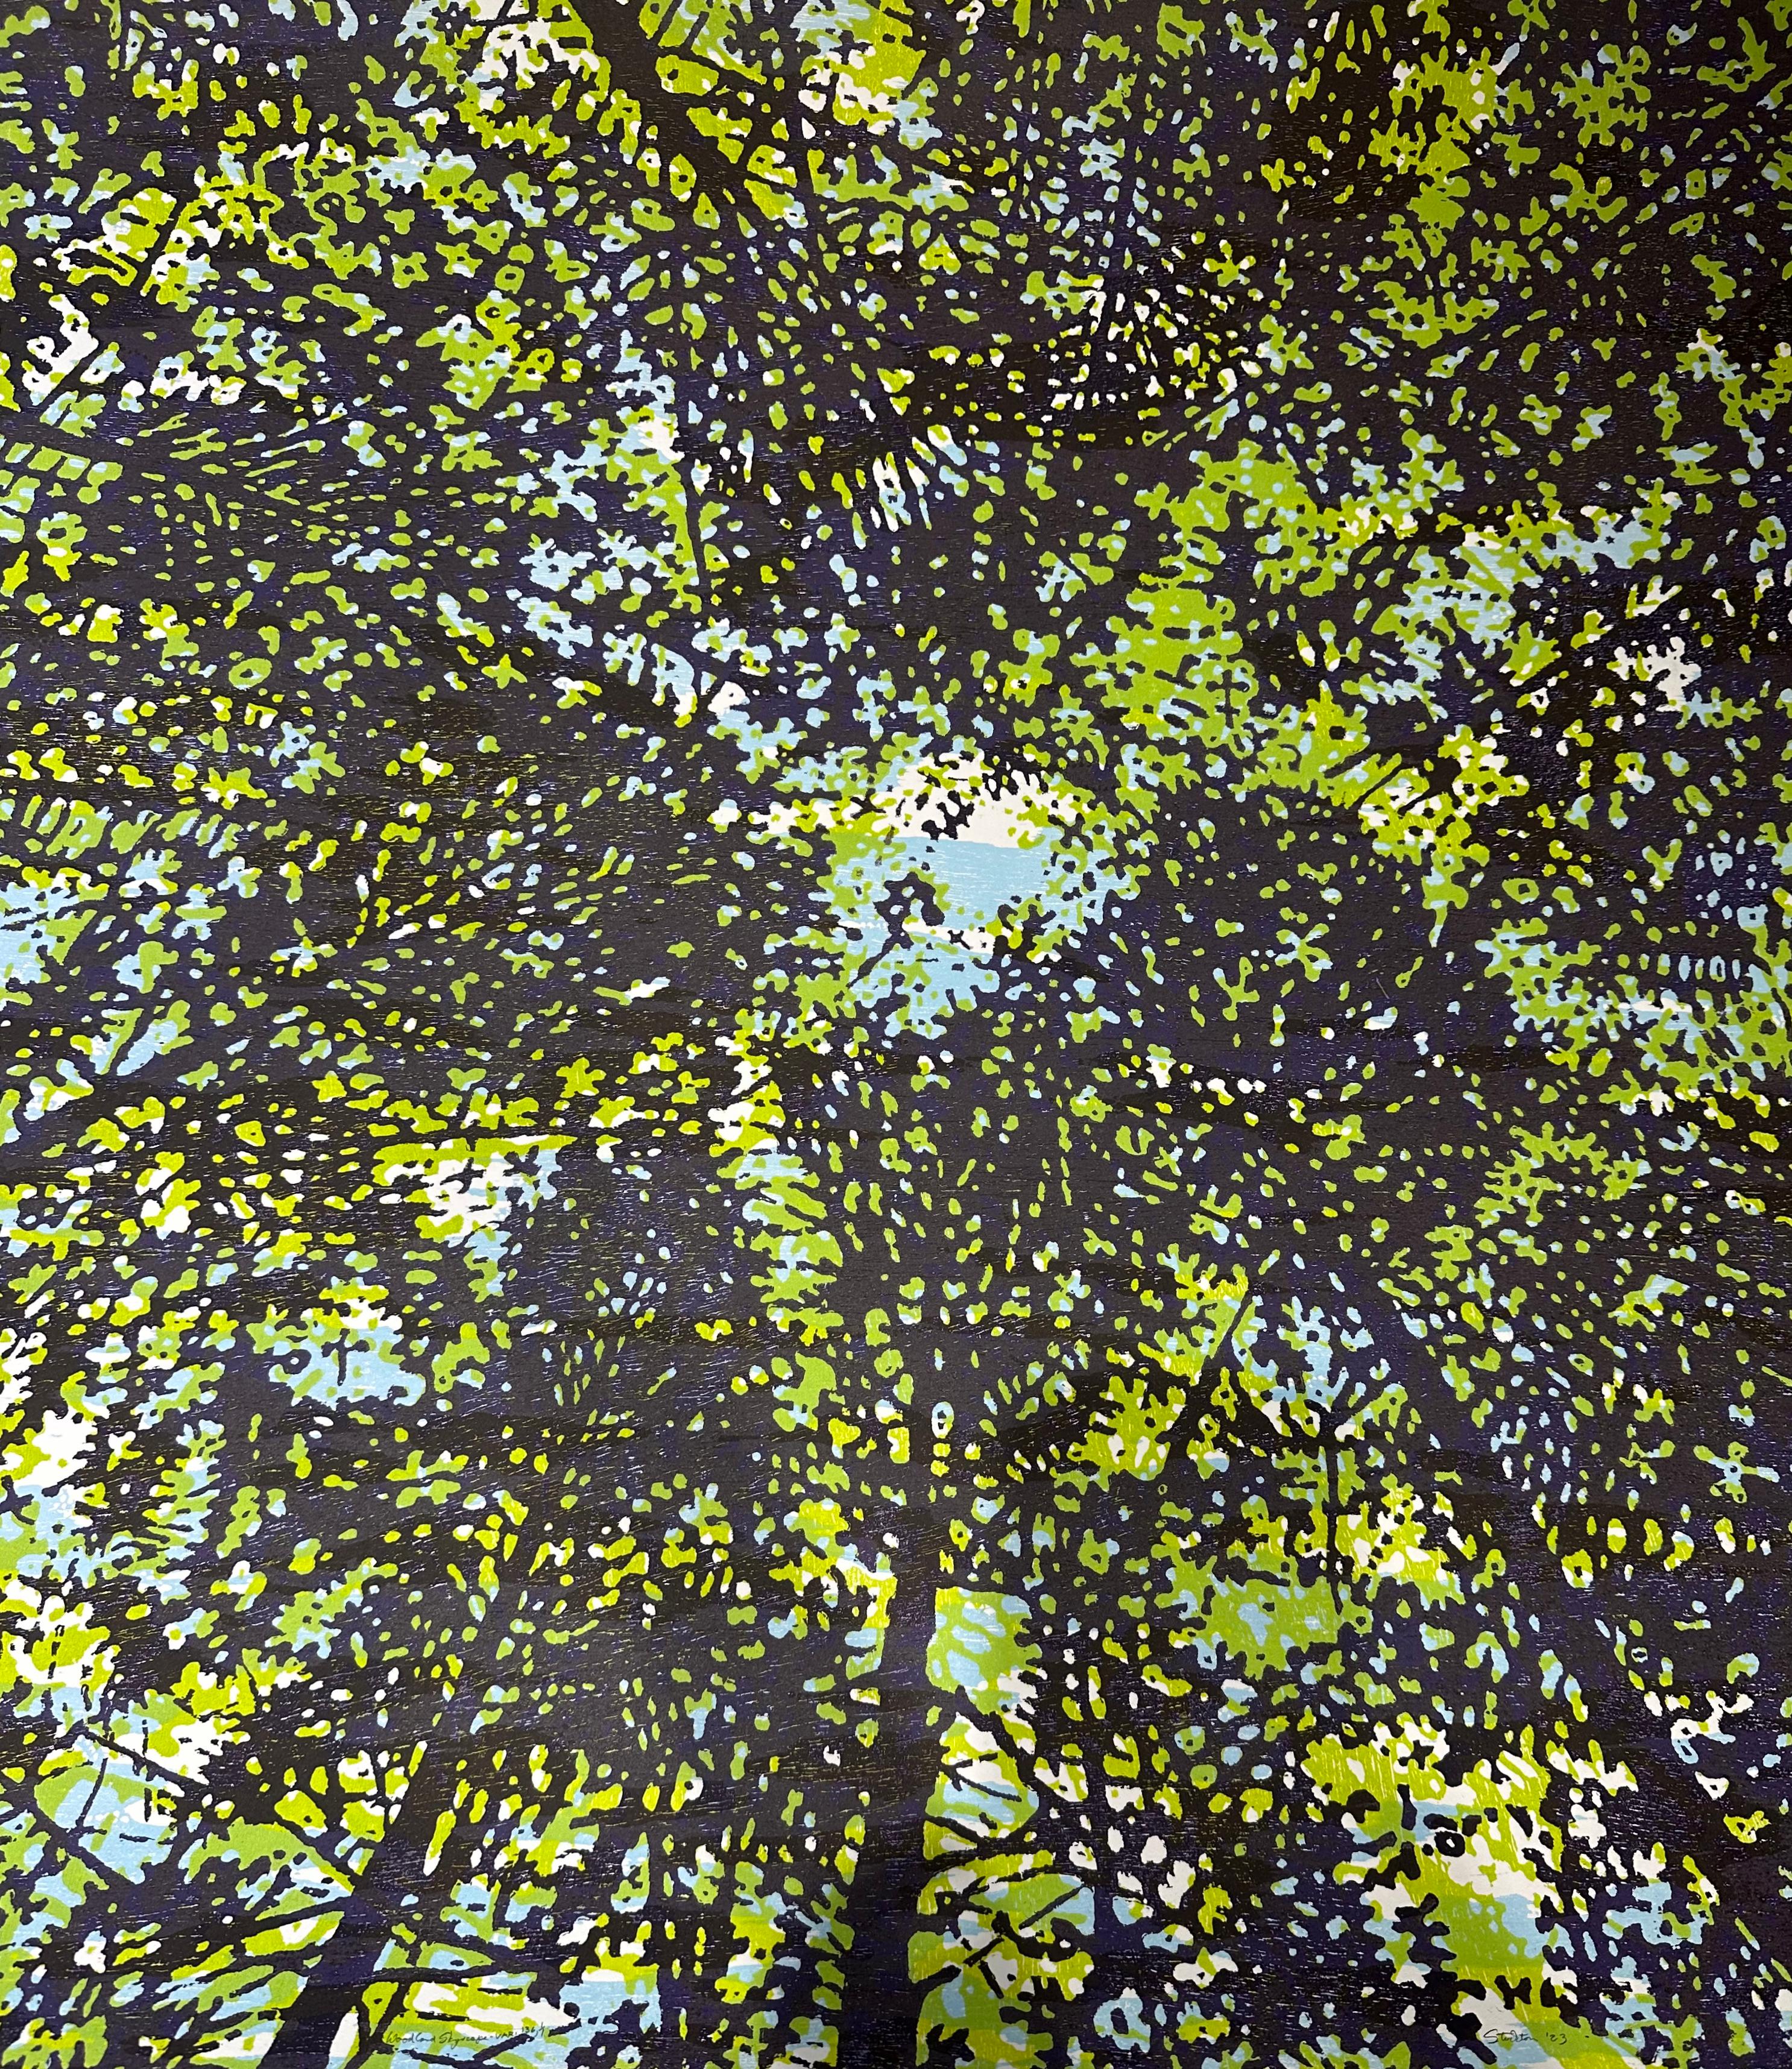 This square woodcut print on paper evokes the peacefulness of looking upwards through a forest canopy in a symmetrical pattern composed of the silhouettes of trees in shades of dark eggplant, bright lime green and pale sky blue. The monotype brings